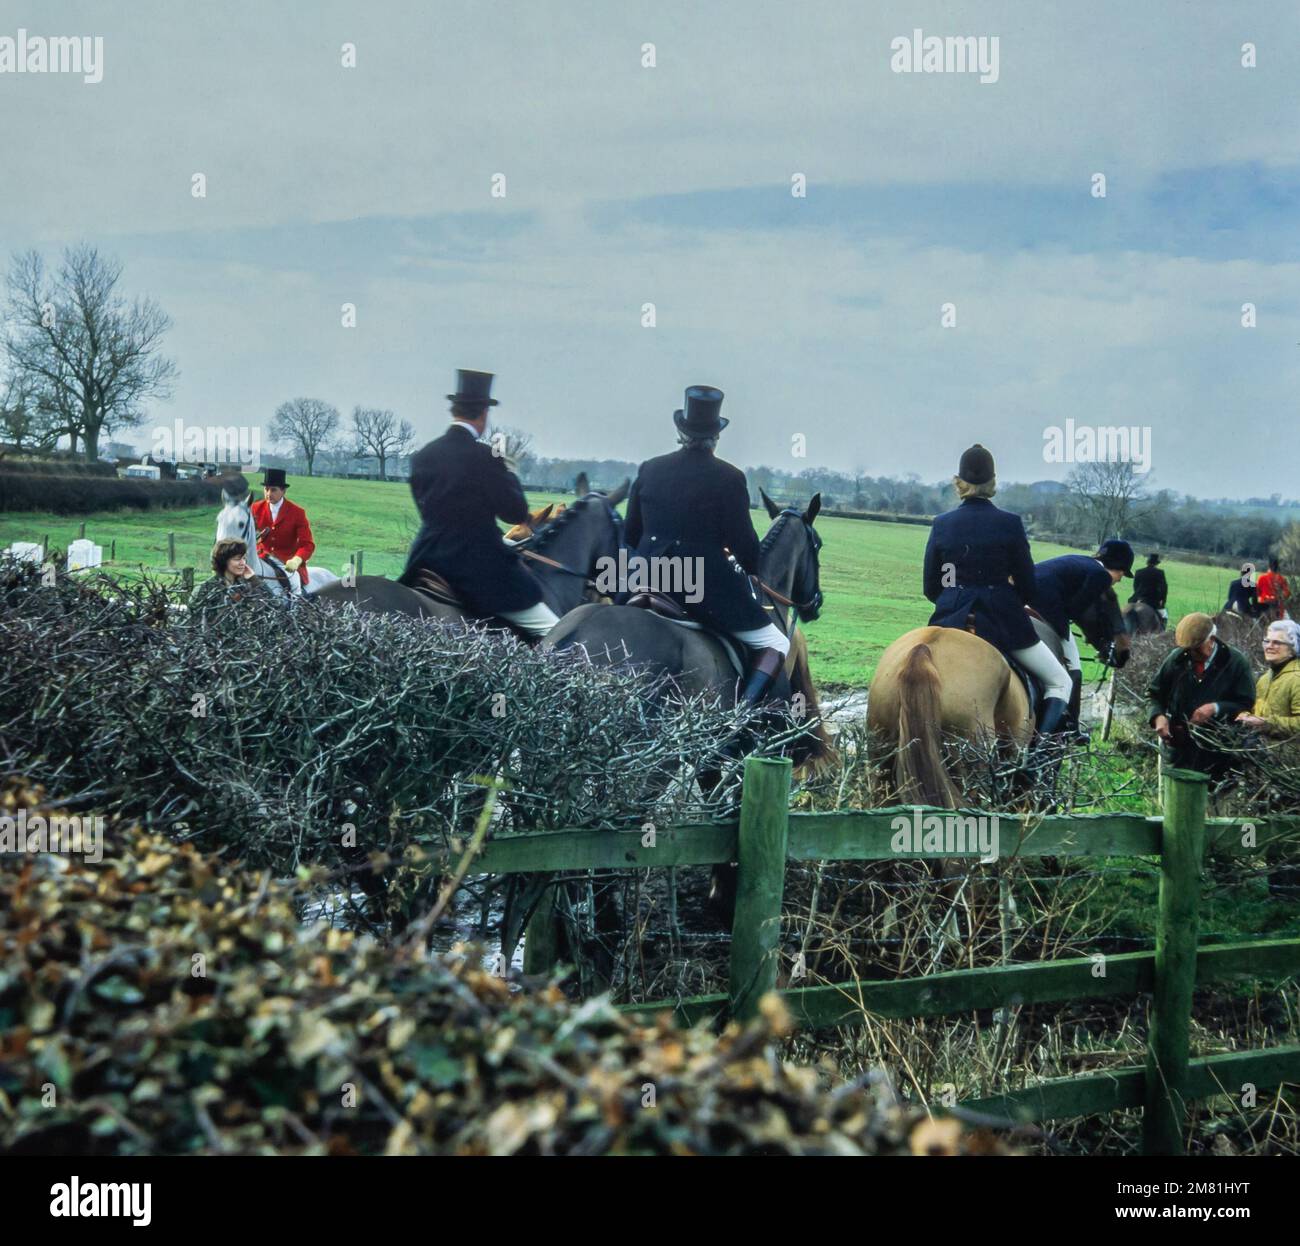 Fox hunting in Foxton, Leicestershire in 1982. This photo was taken from the original slide. Fox hunting has been recognised as a cruel sport and has been banned since 2004. Stock Photo